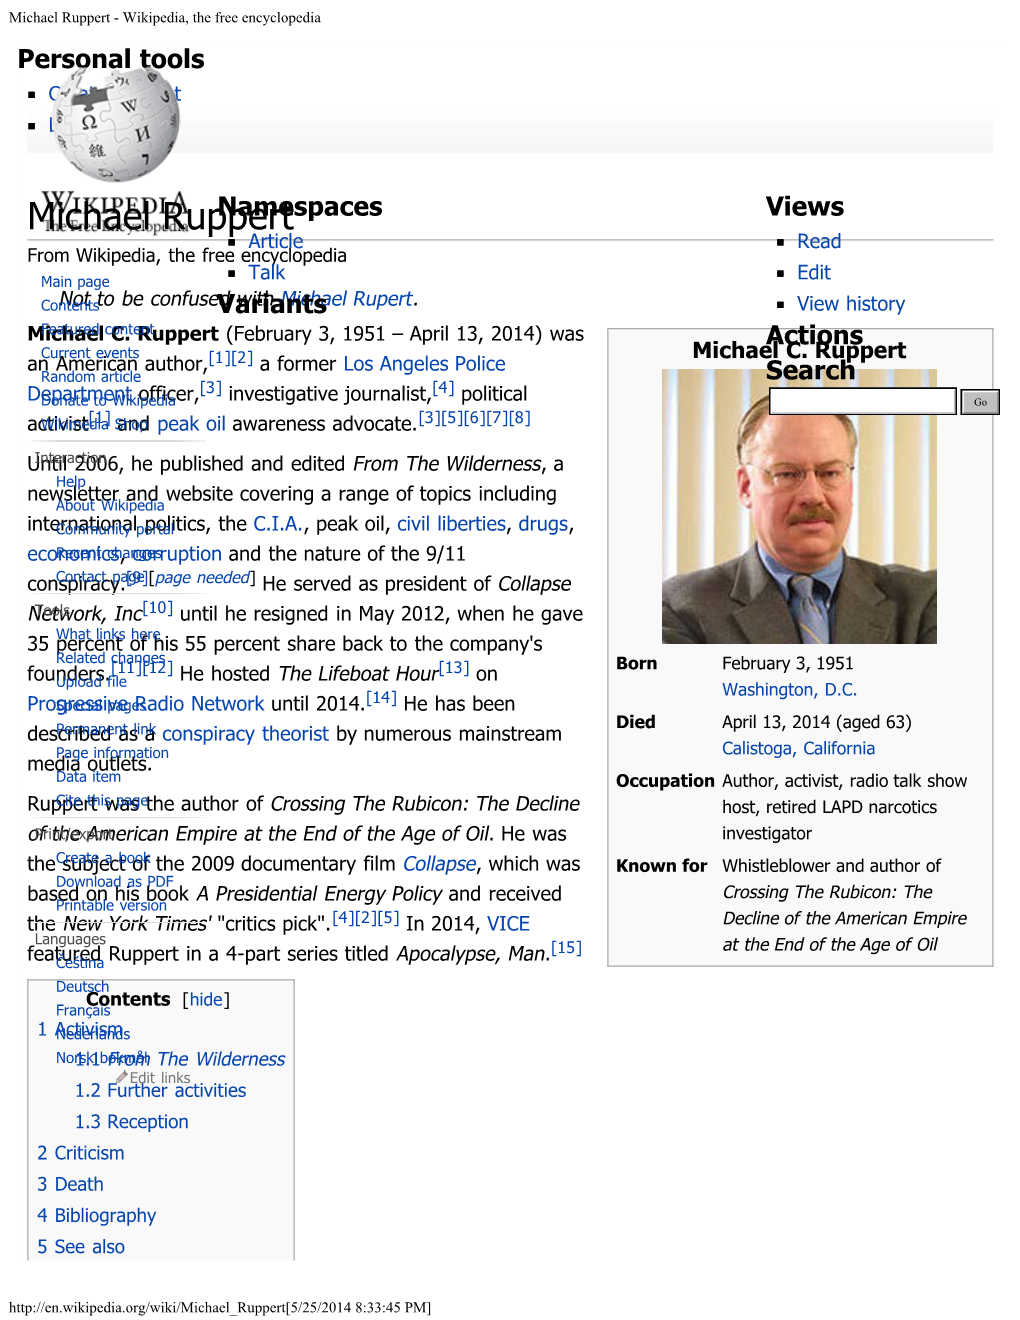 Michael Ruppert - Wikipedia, the Free Encyclopedia Personal Tools Create Account Log In